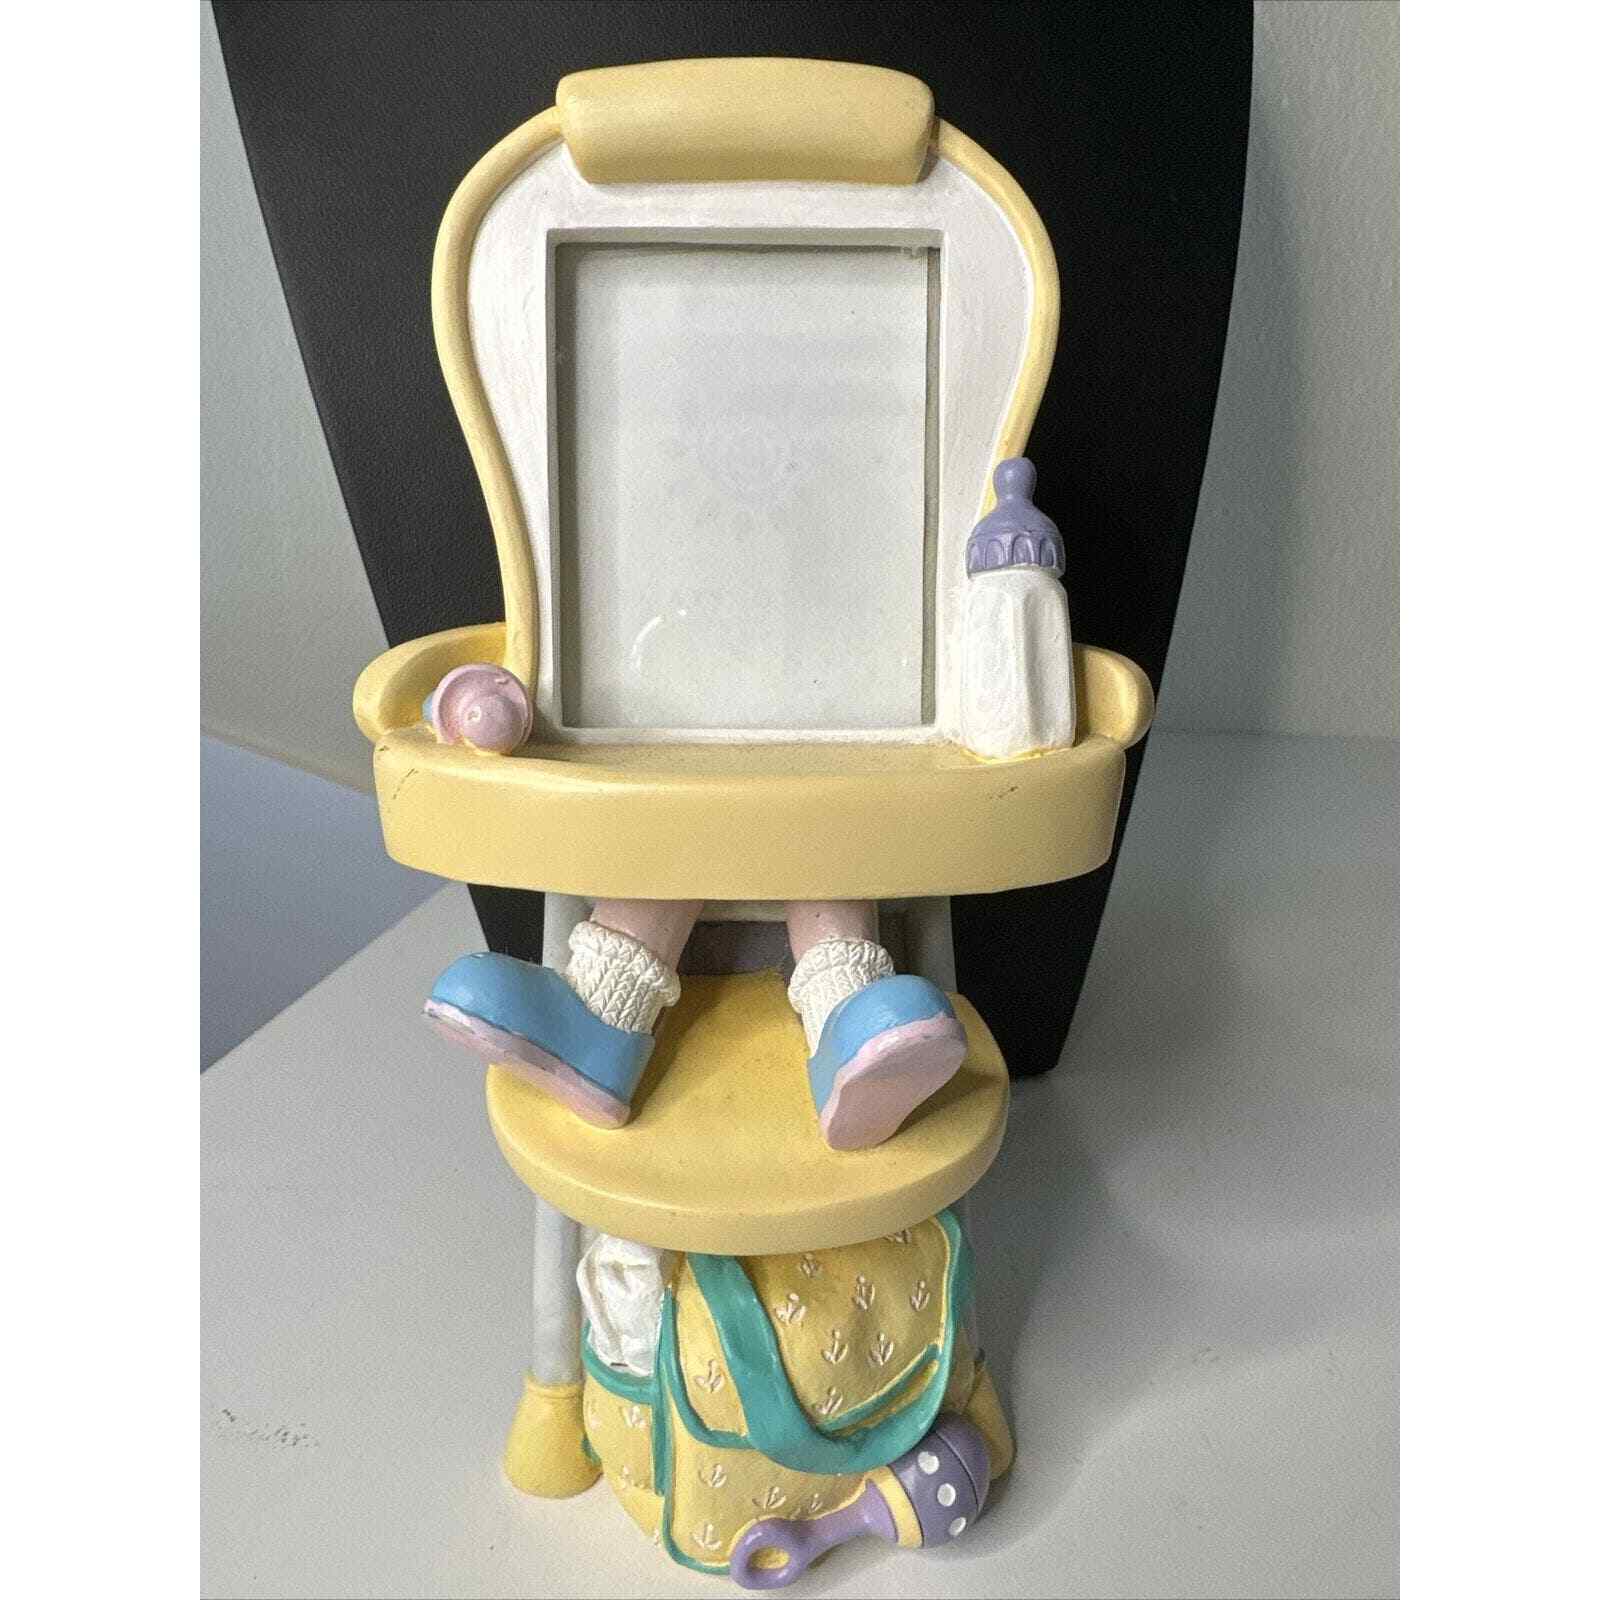 Rare Vintage Baby In High Chair 3-D picture frame. Super Cute